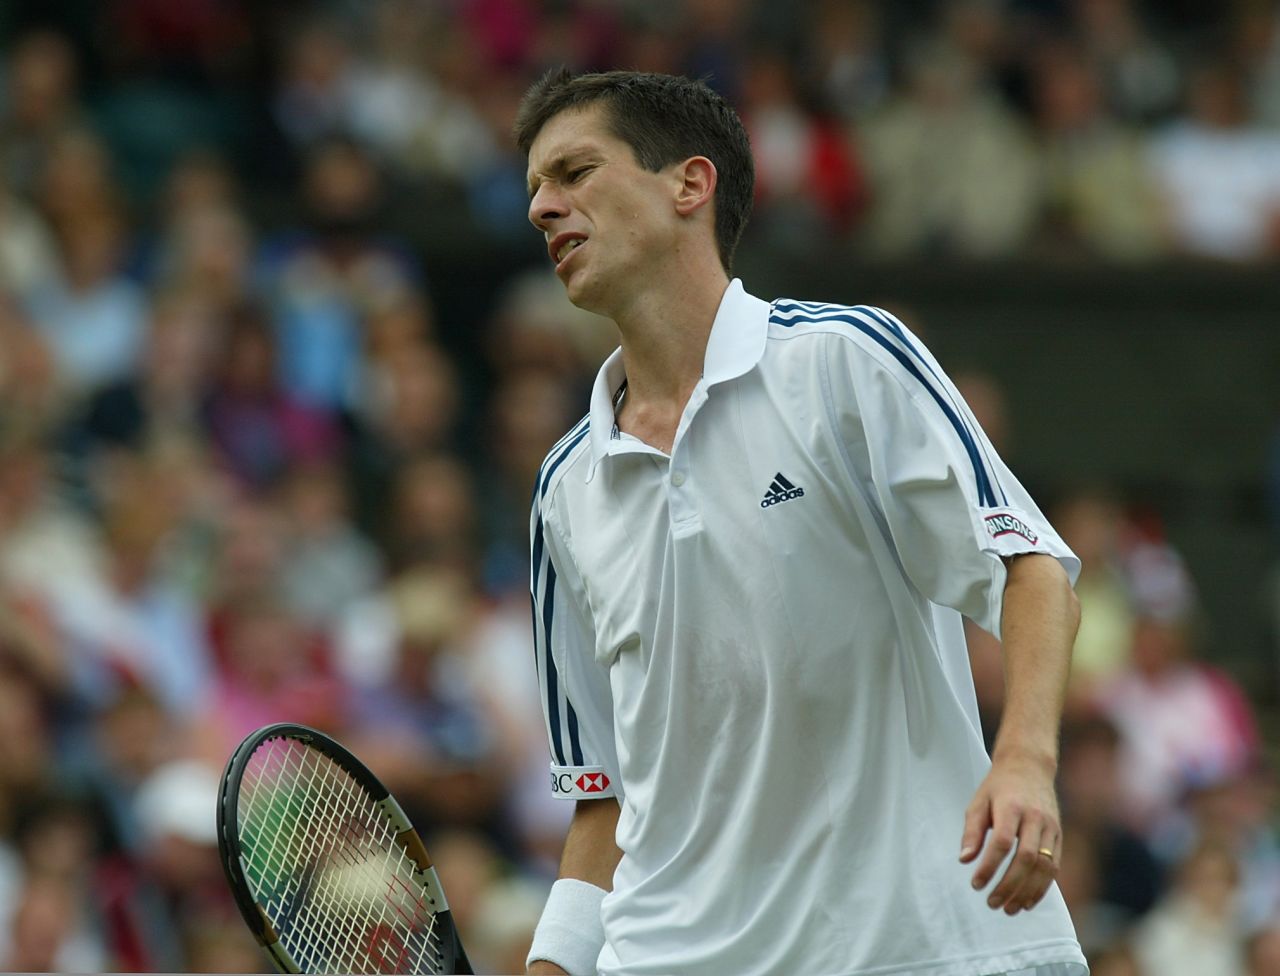 Murray has assumed the position once held by Tim Henman as Britain's premier tennis hope. Henman reached the Wimbledon semifinals on four occasions between 1998 and 2002.